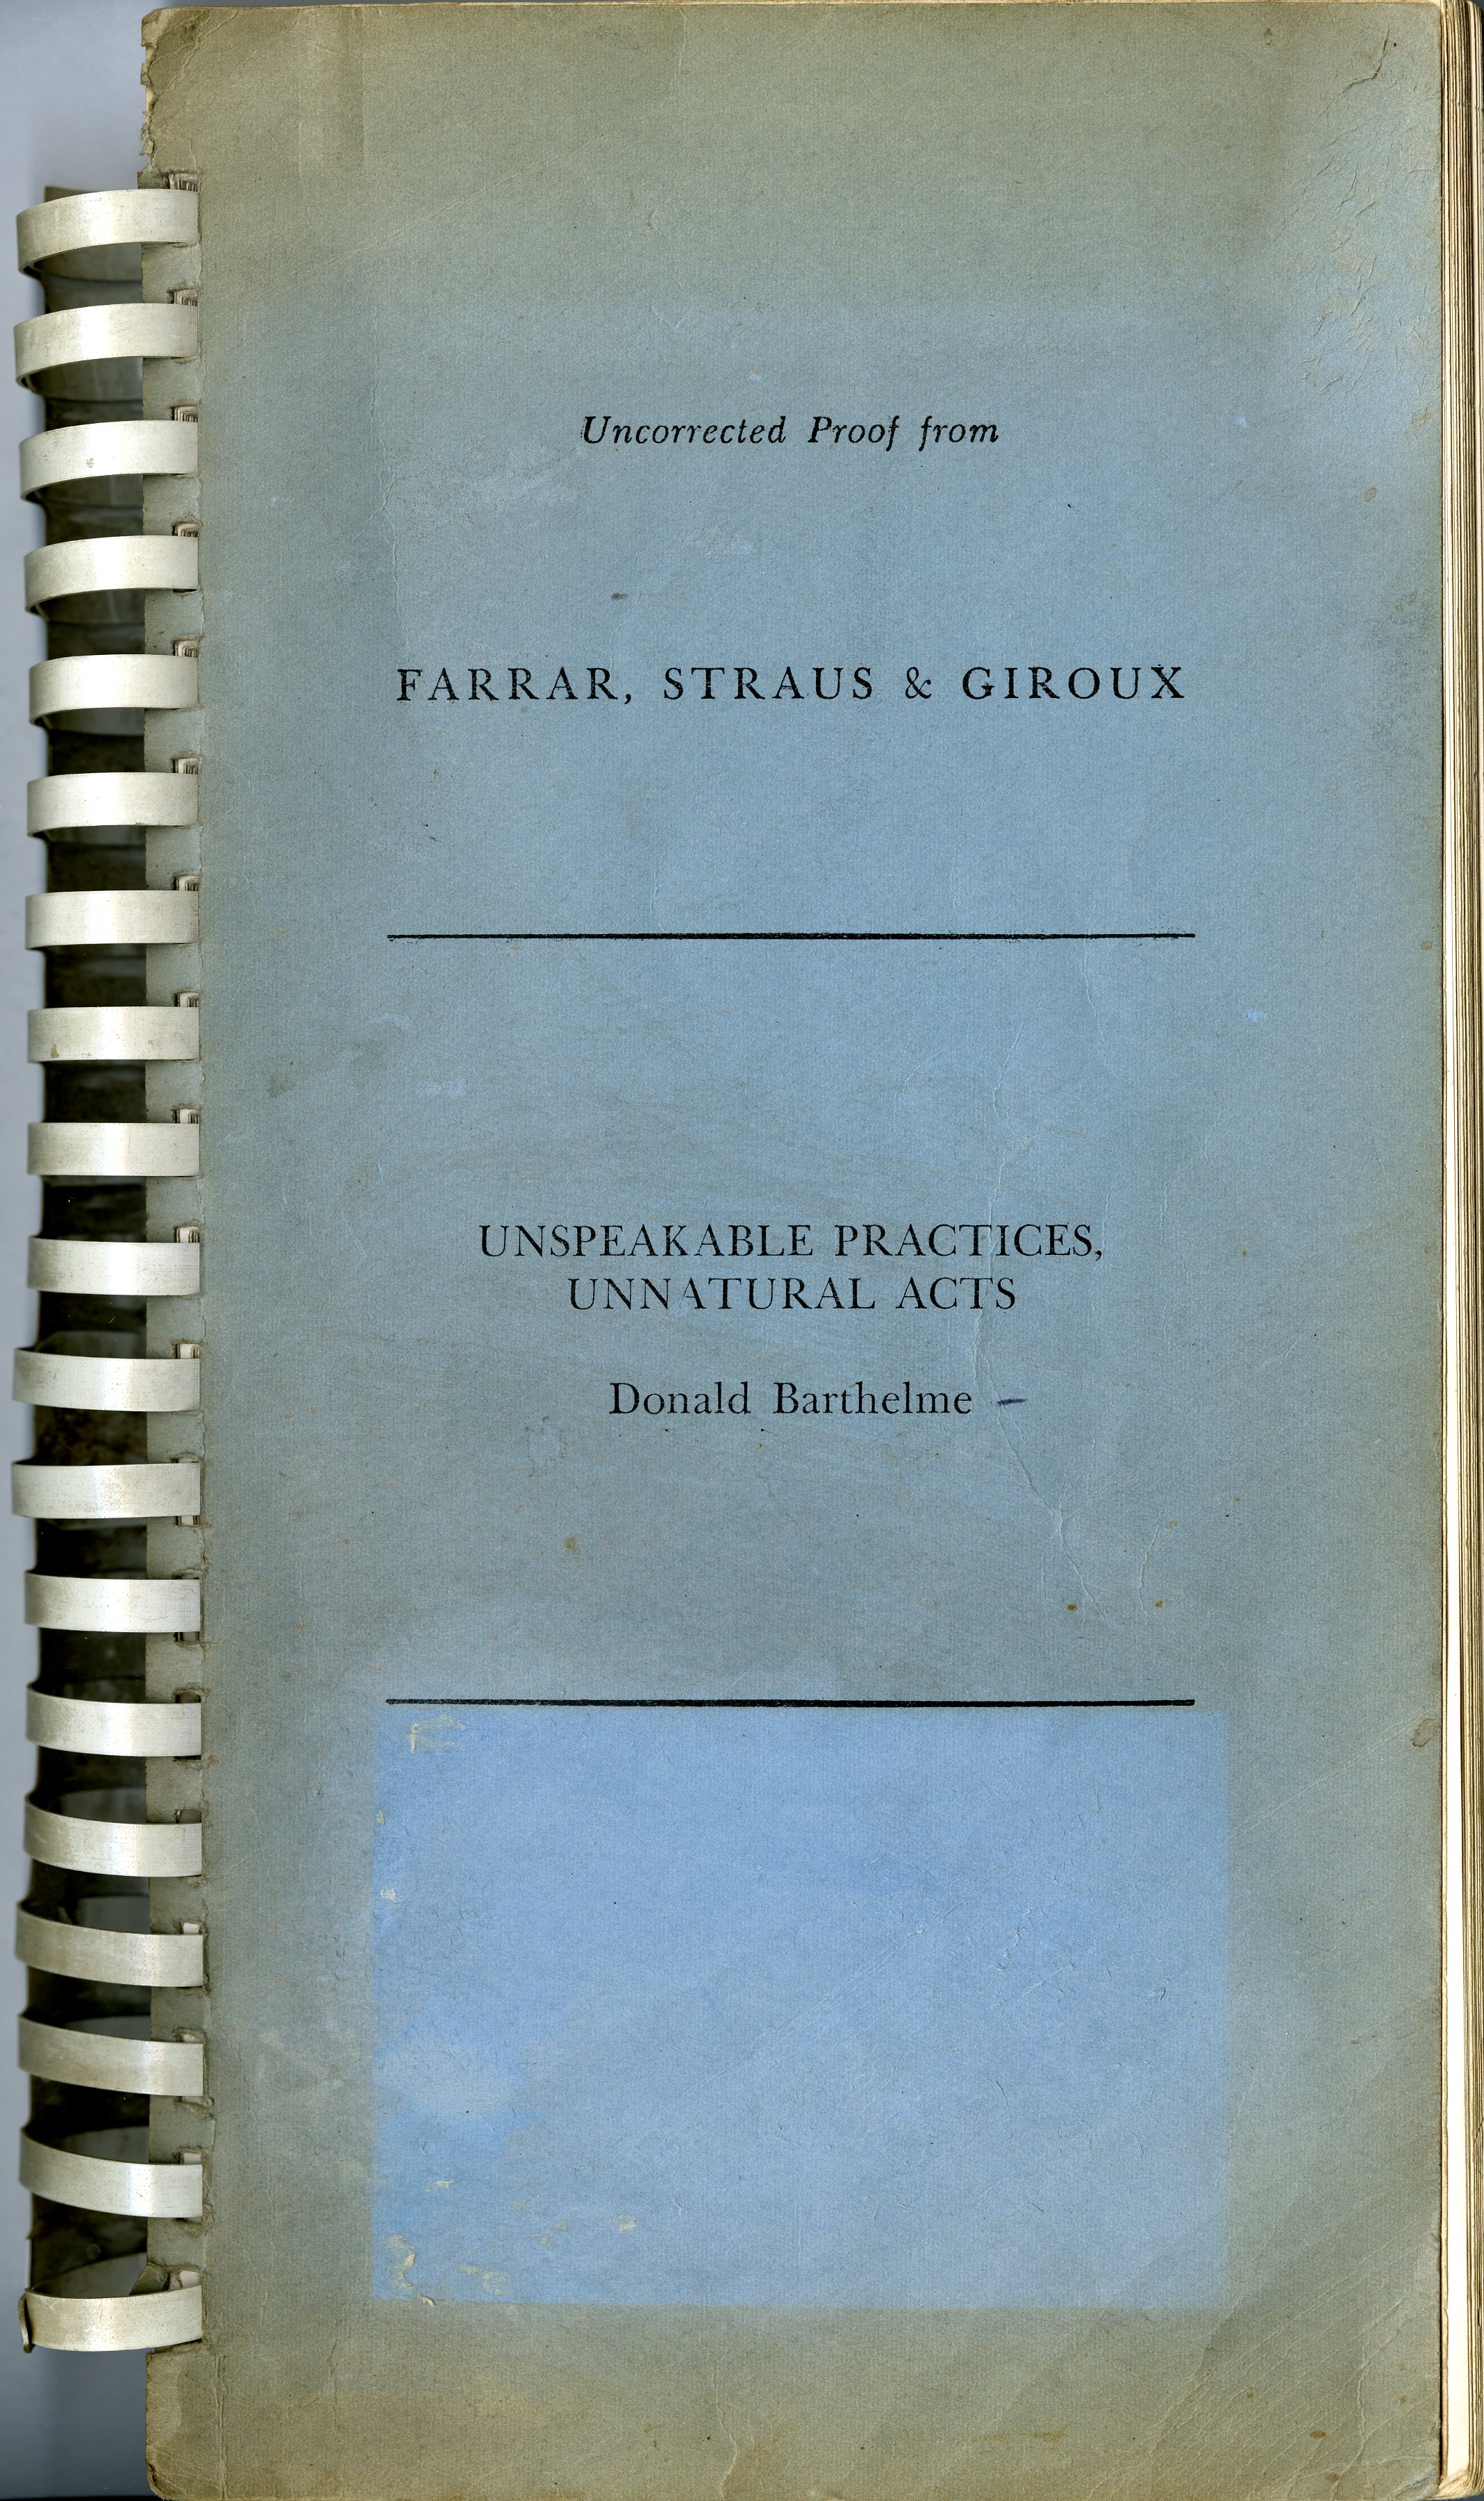 Barthelme, Donald. Unspeakable Practices, Unnatural Acts. Uncorrected proof. Farrar, Straus and Giroux, 1968, from the Donald Barthelme papers